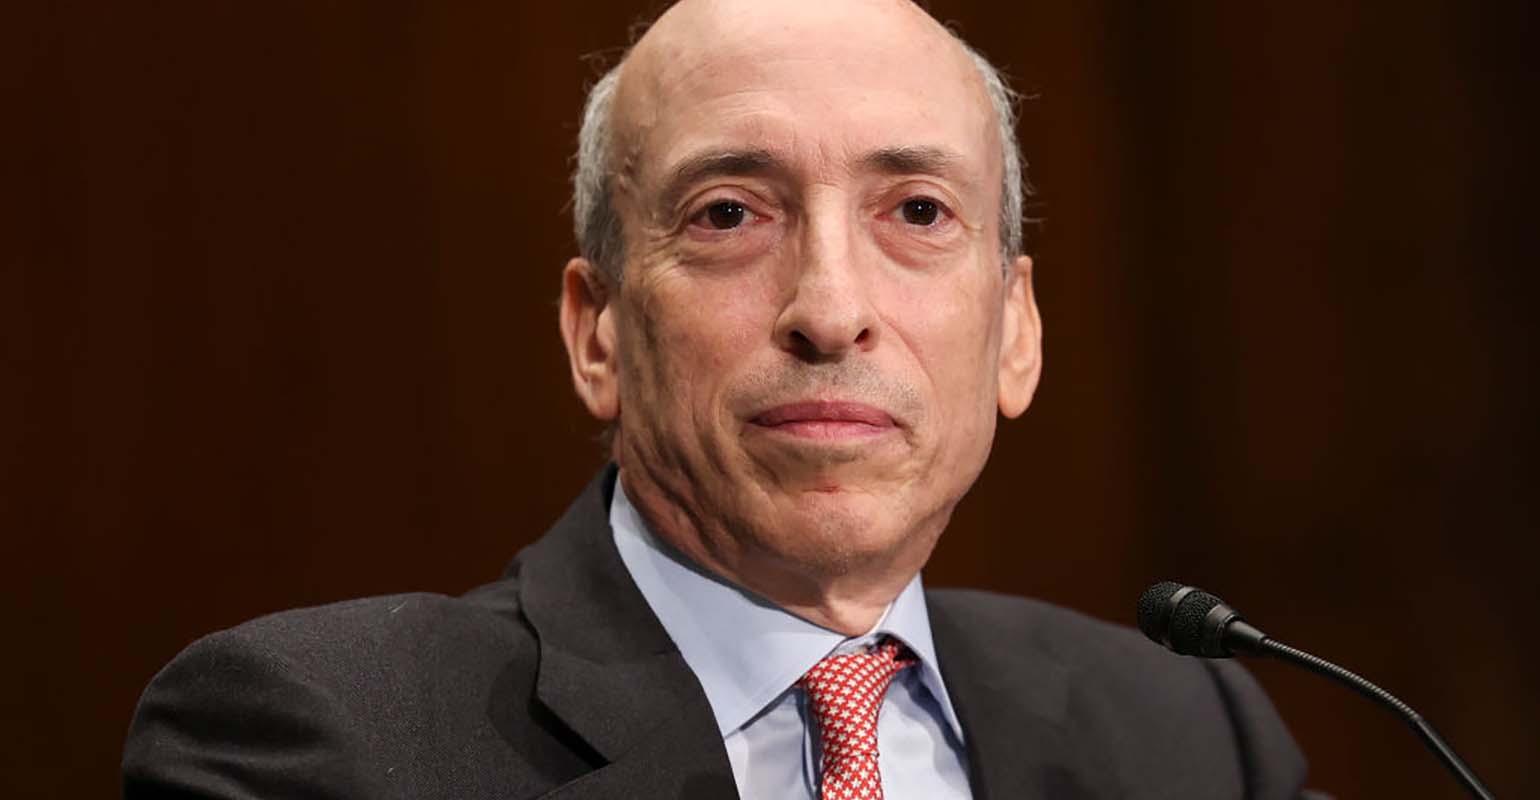 The crypto industry is firing back against SEC Chair Gary Gensler's comments that decentralized protocols like Ethereum must issue disclosures